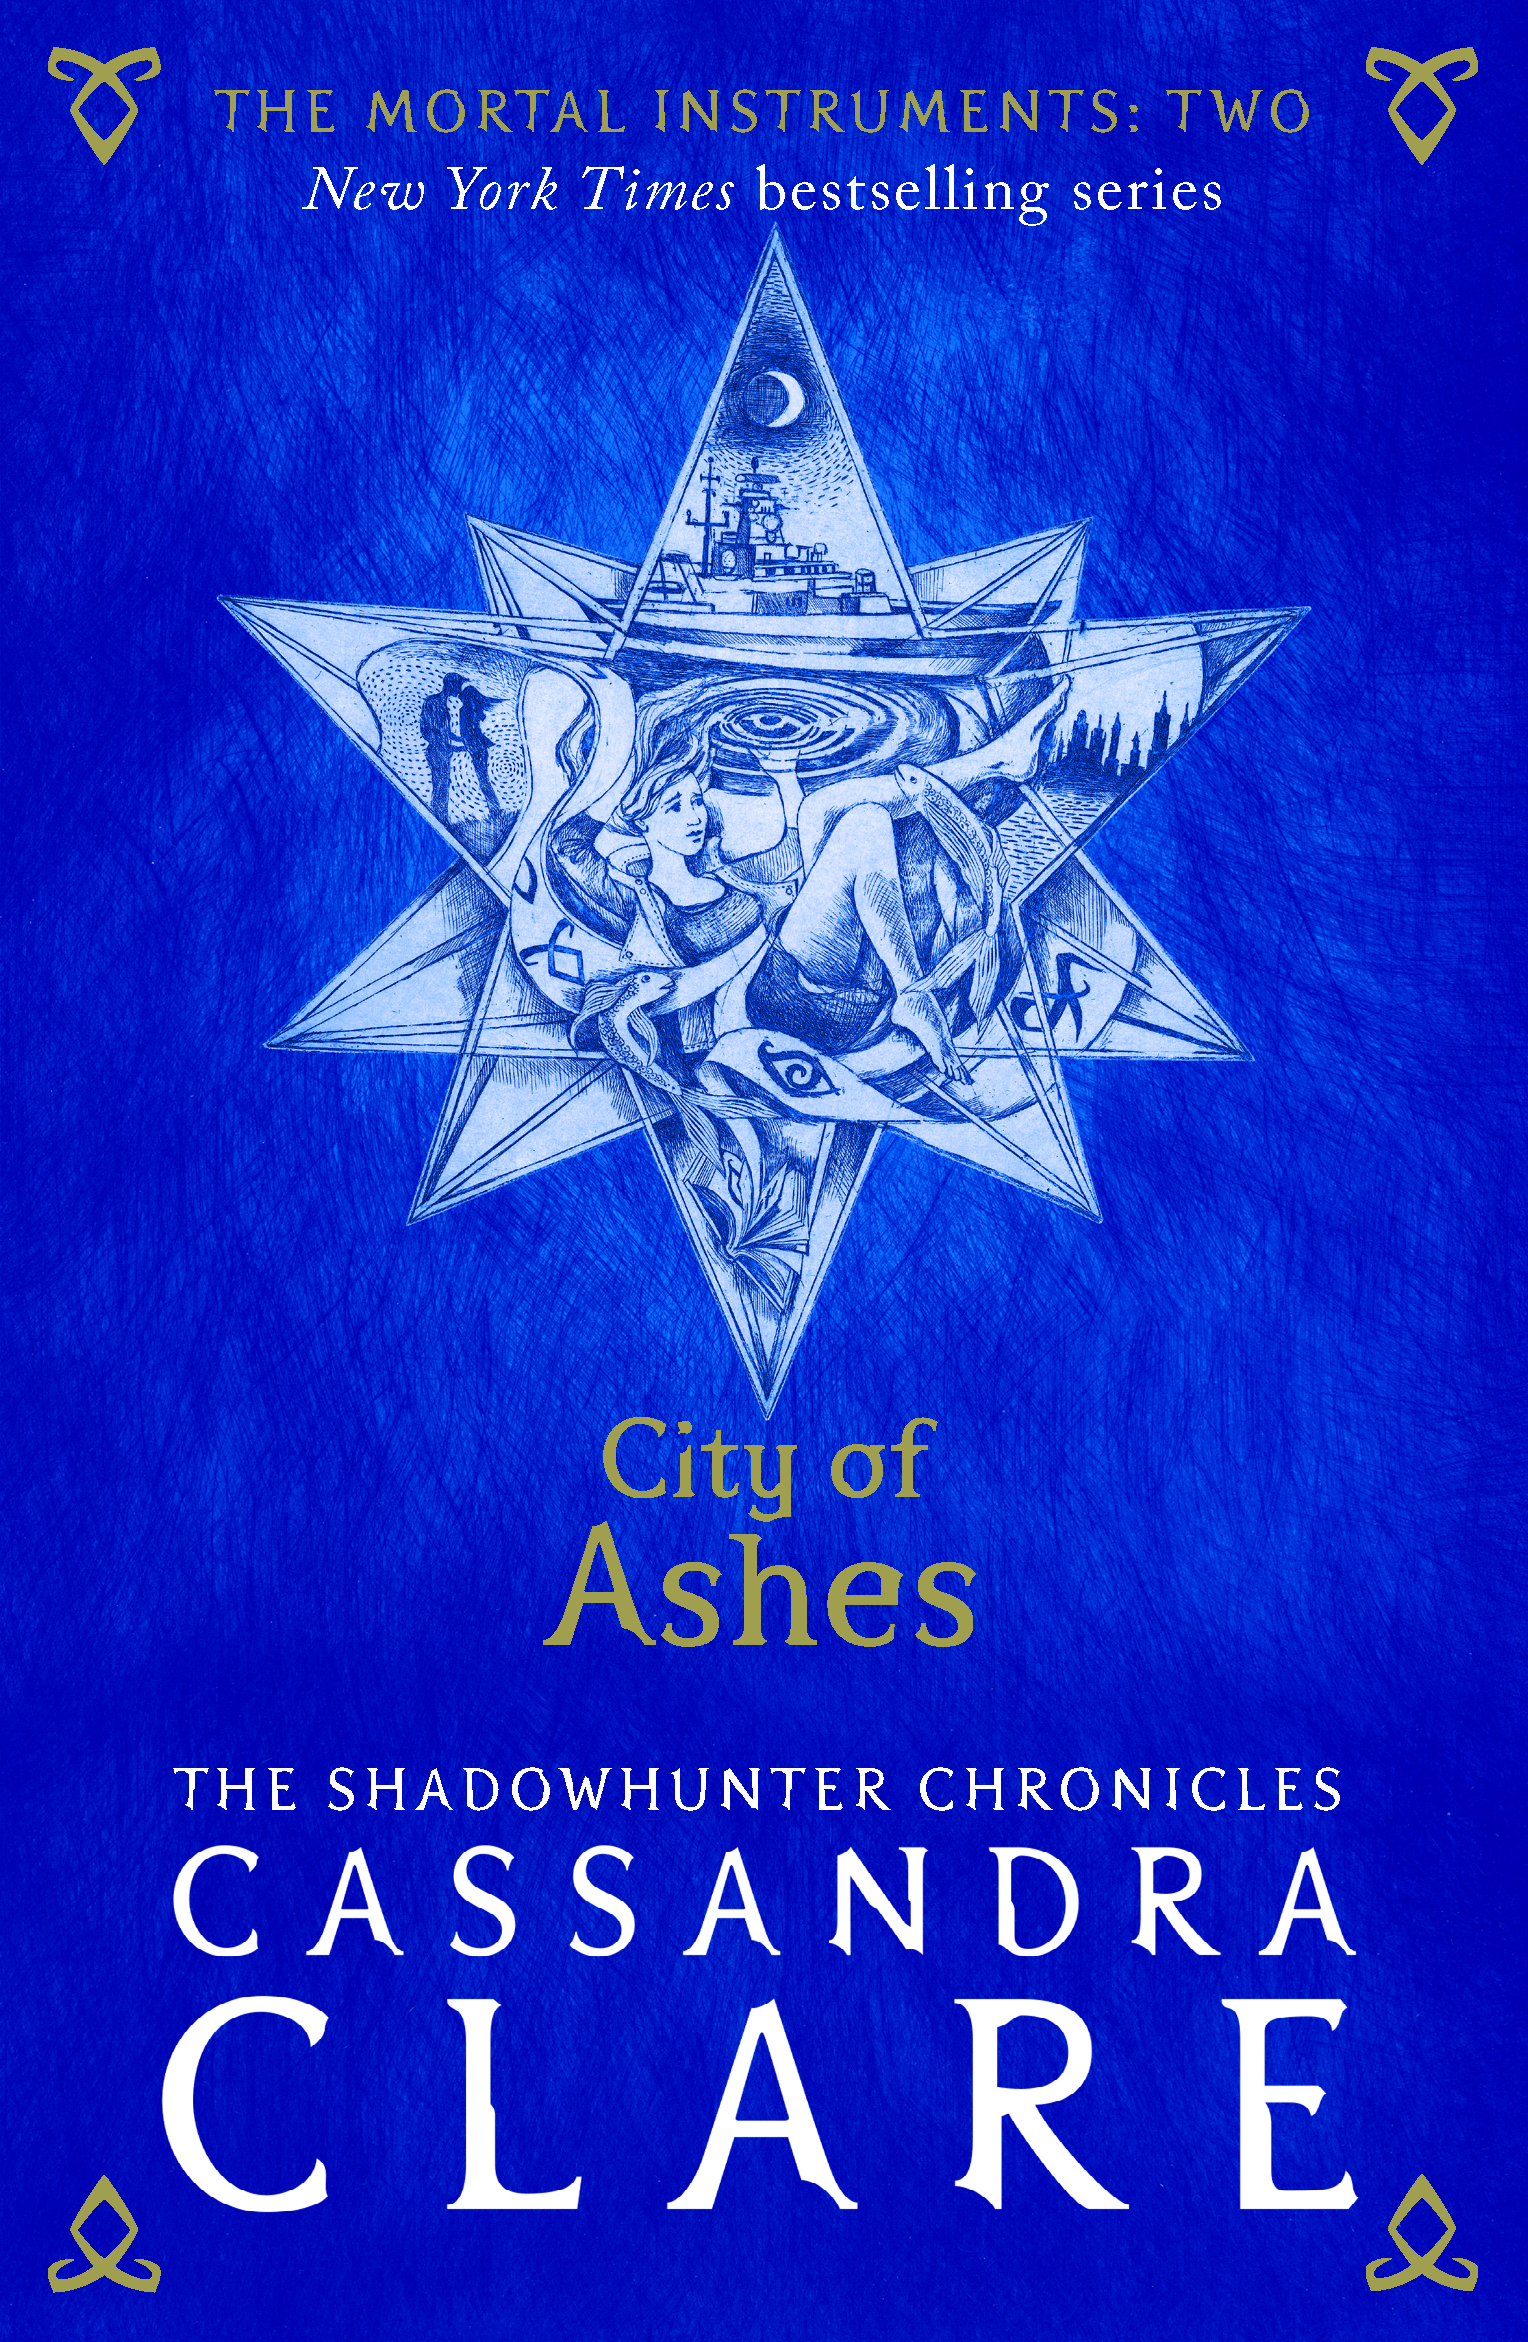 The-Mortal-Instruments-2-City-of-Ashes